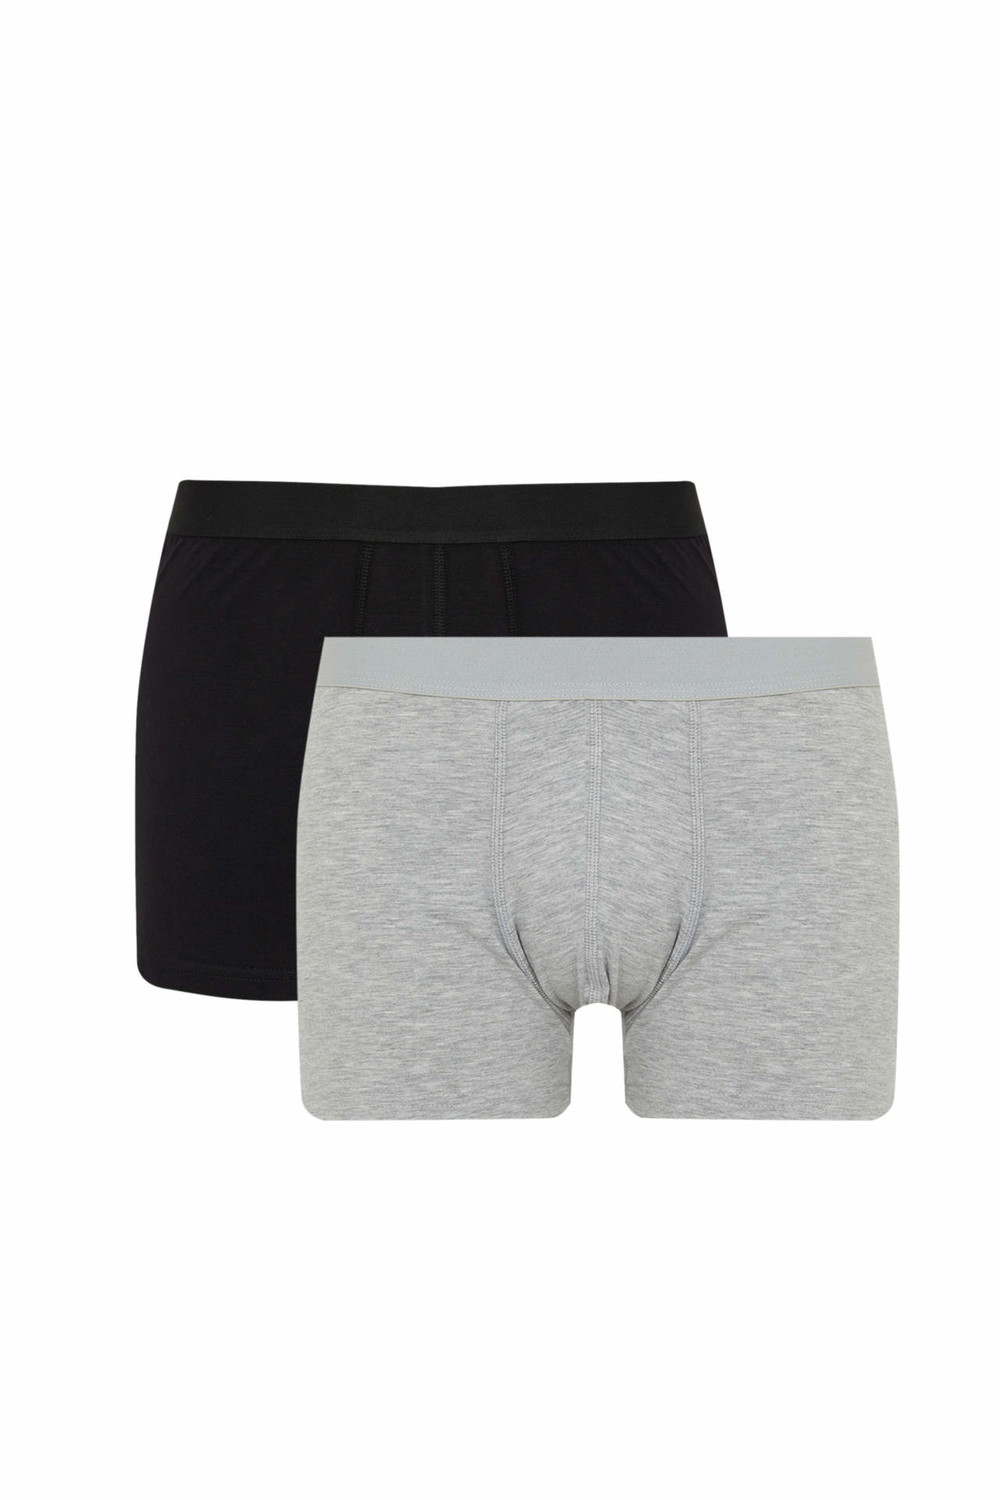 DEFACTO 2 piece Loose Fit Knitted Boxer